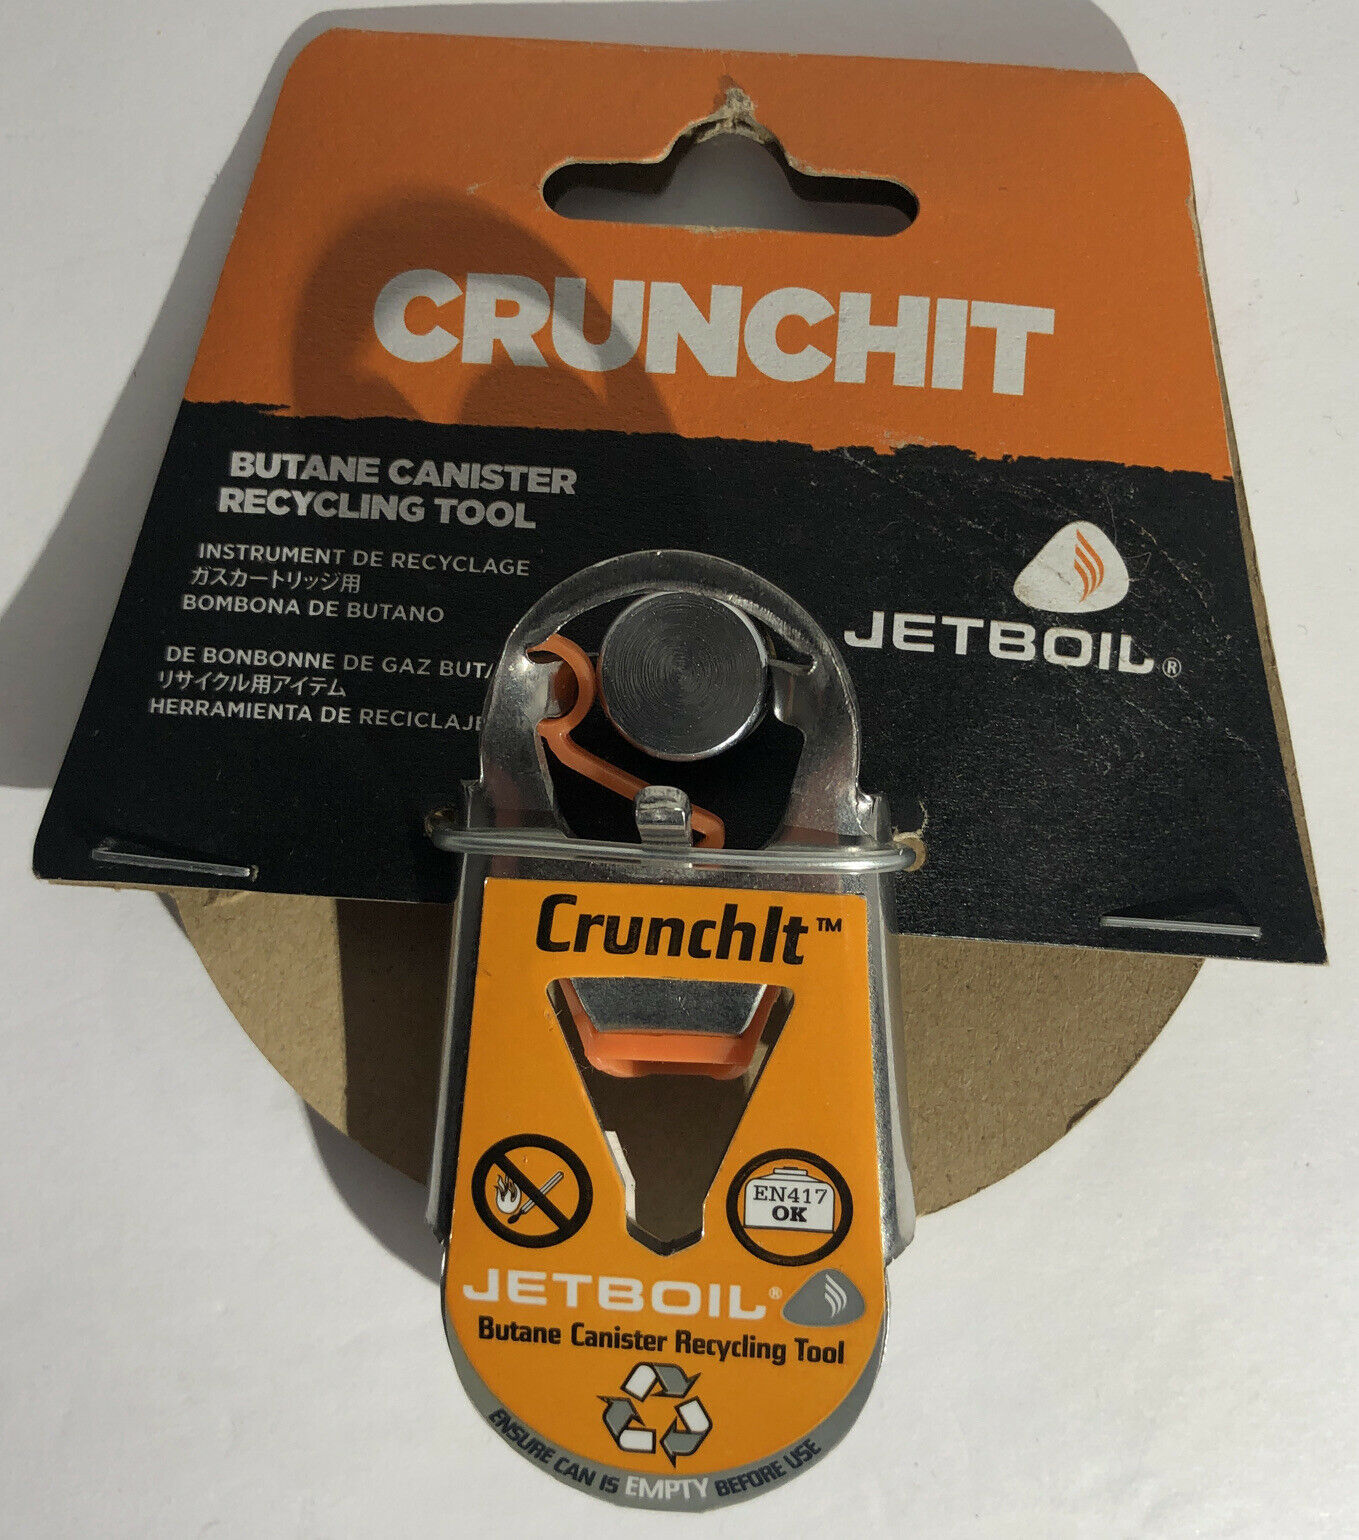 JETBOIL CRUNCHIT FUEL CANISTER RECYCLING TOOL